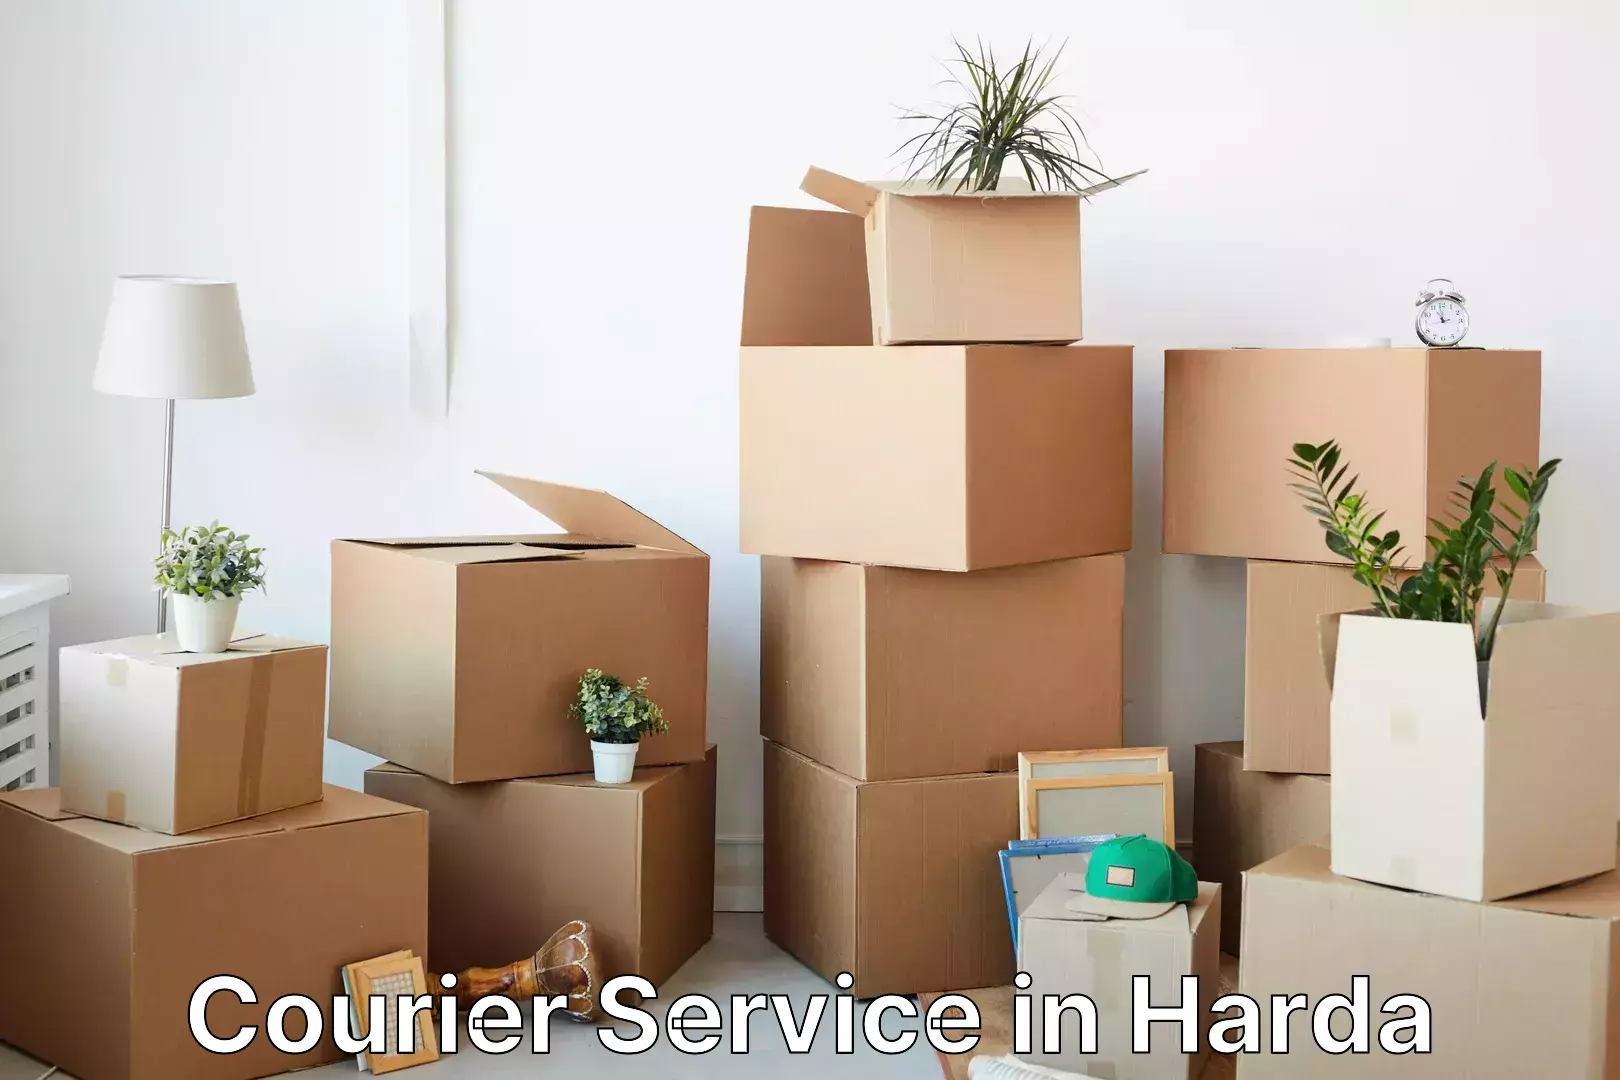 Same-day delivery solutions in Harda